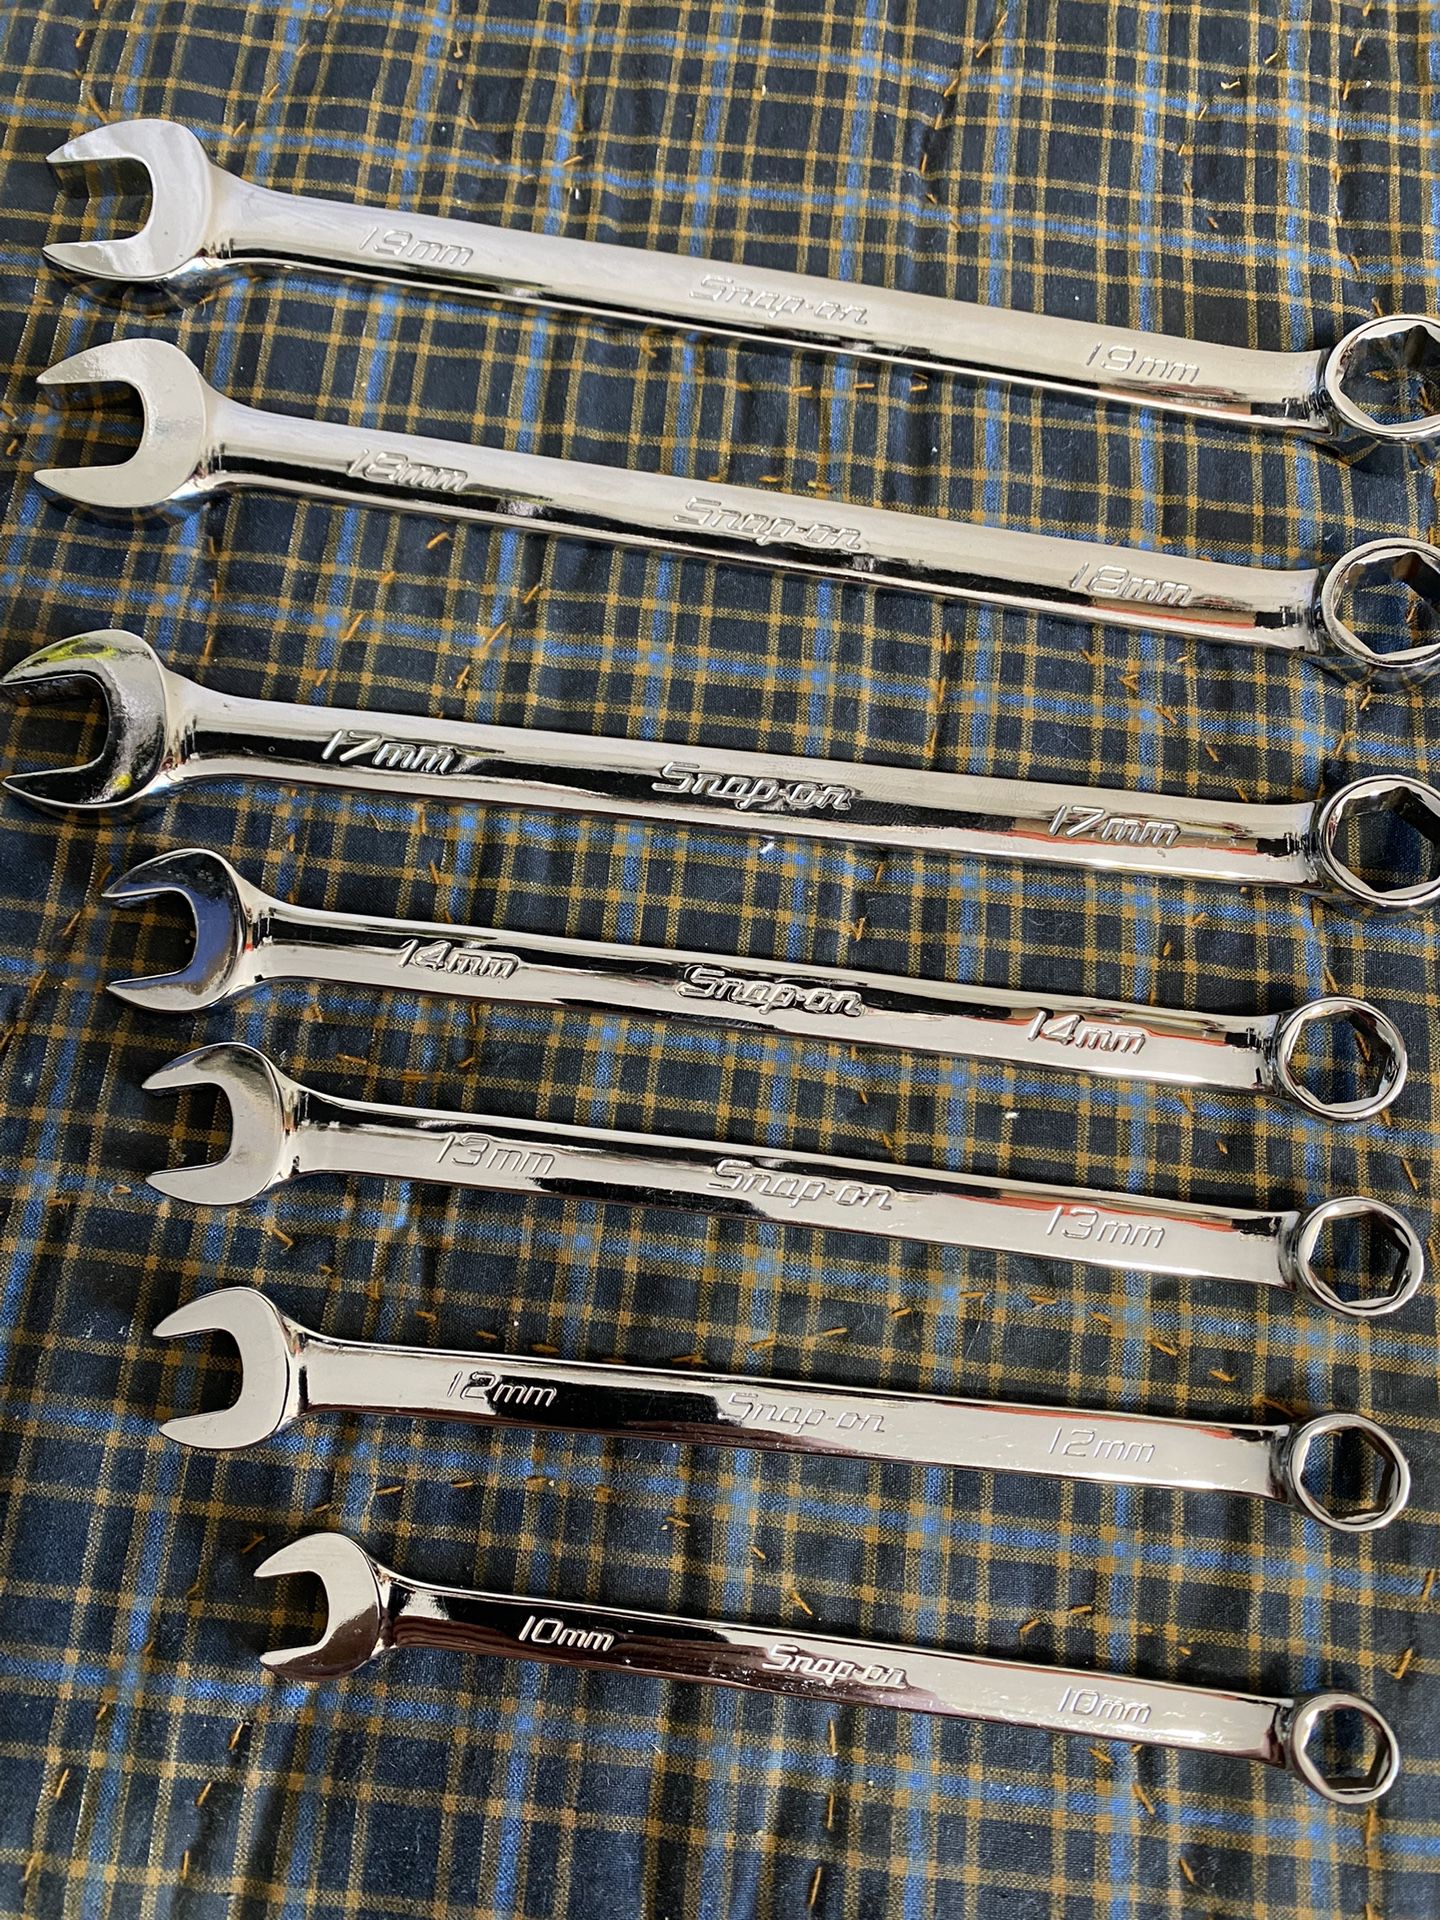 Snap On Tools Combination Wrench Lot OSHM 